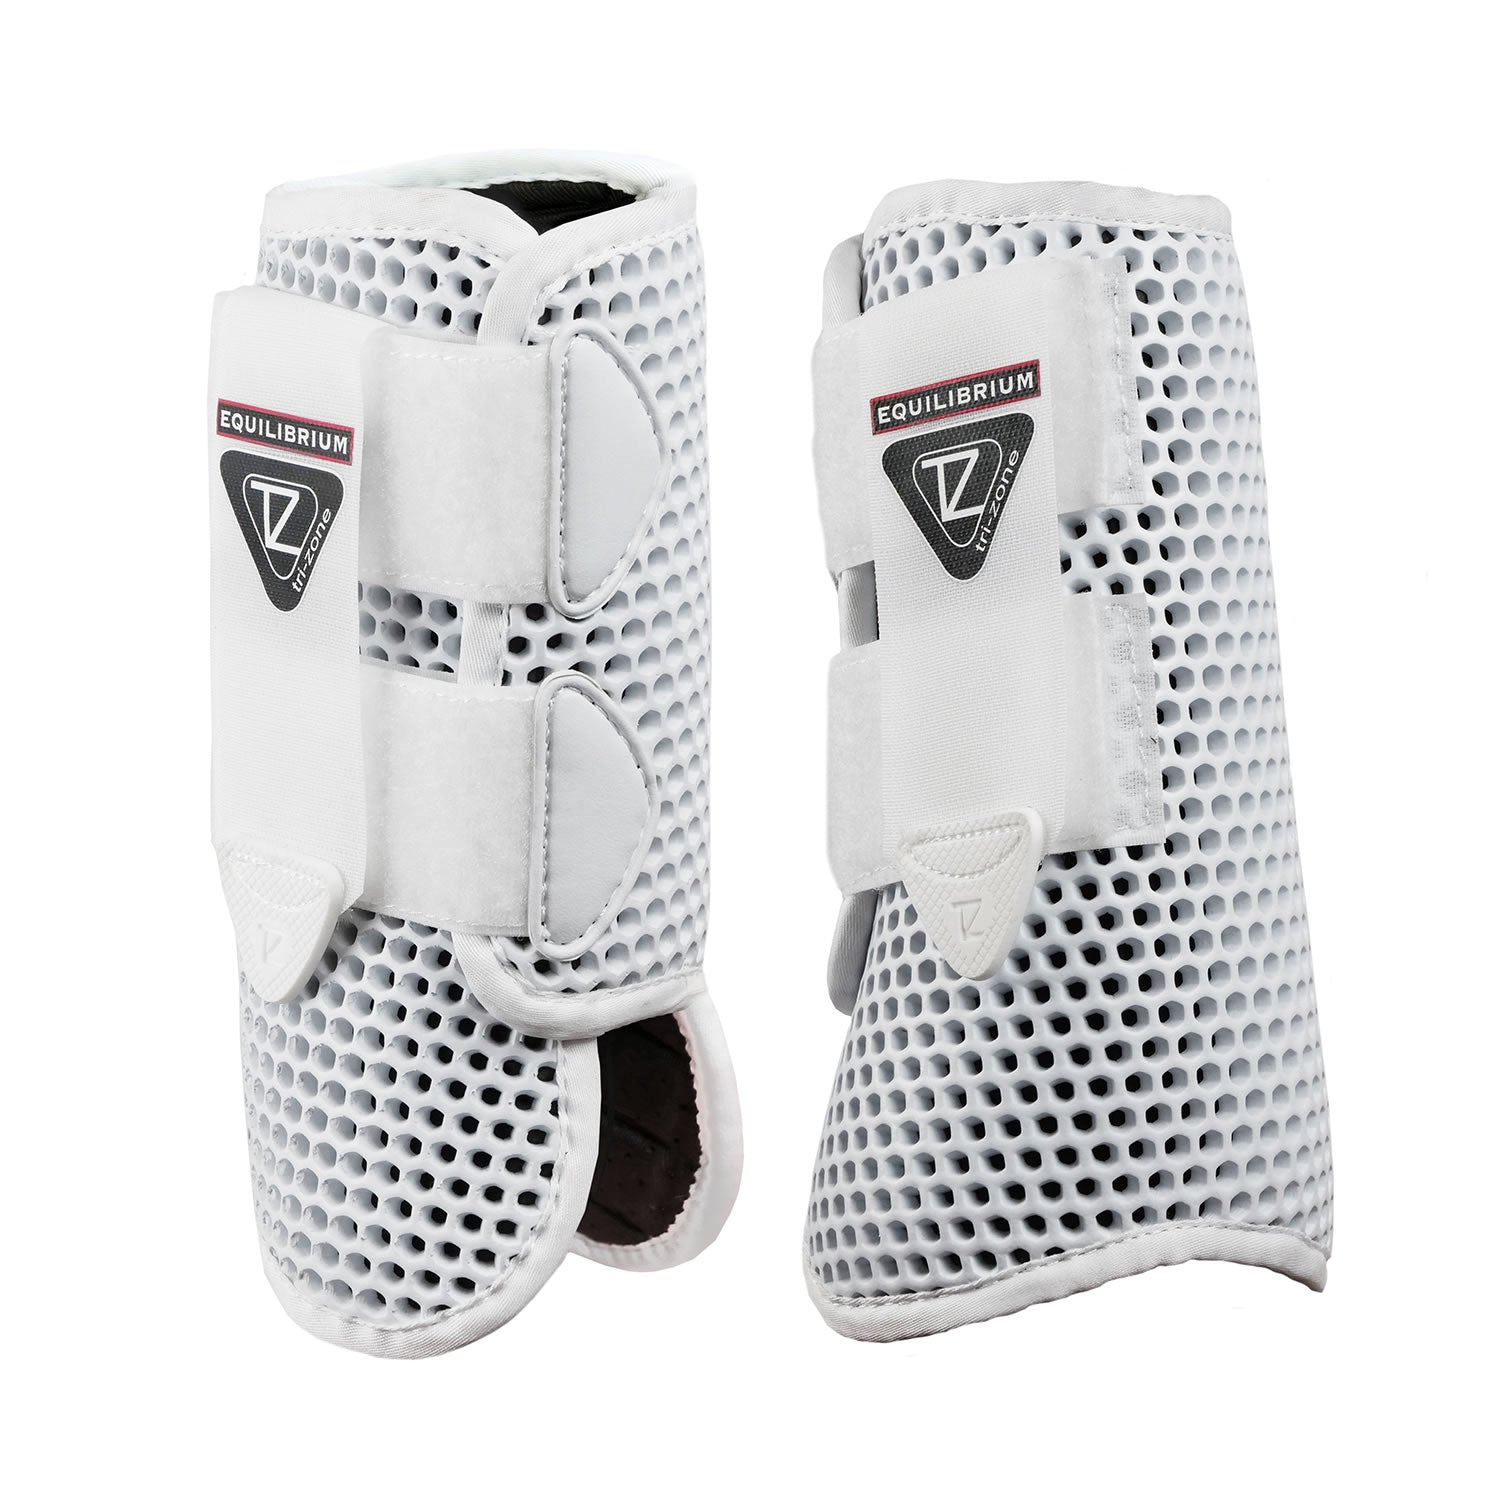 Equilibrium Tri-Zone All Sports Boots - White - Large